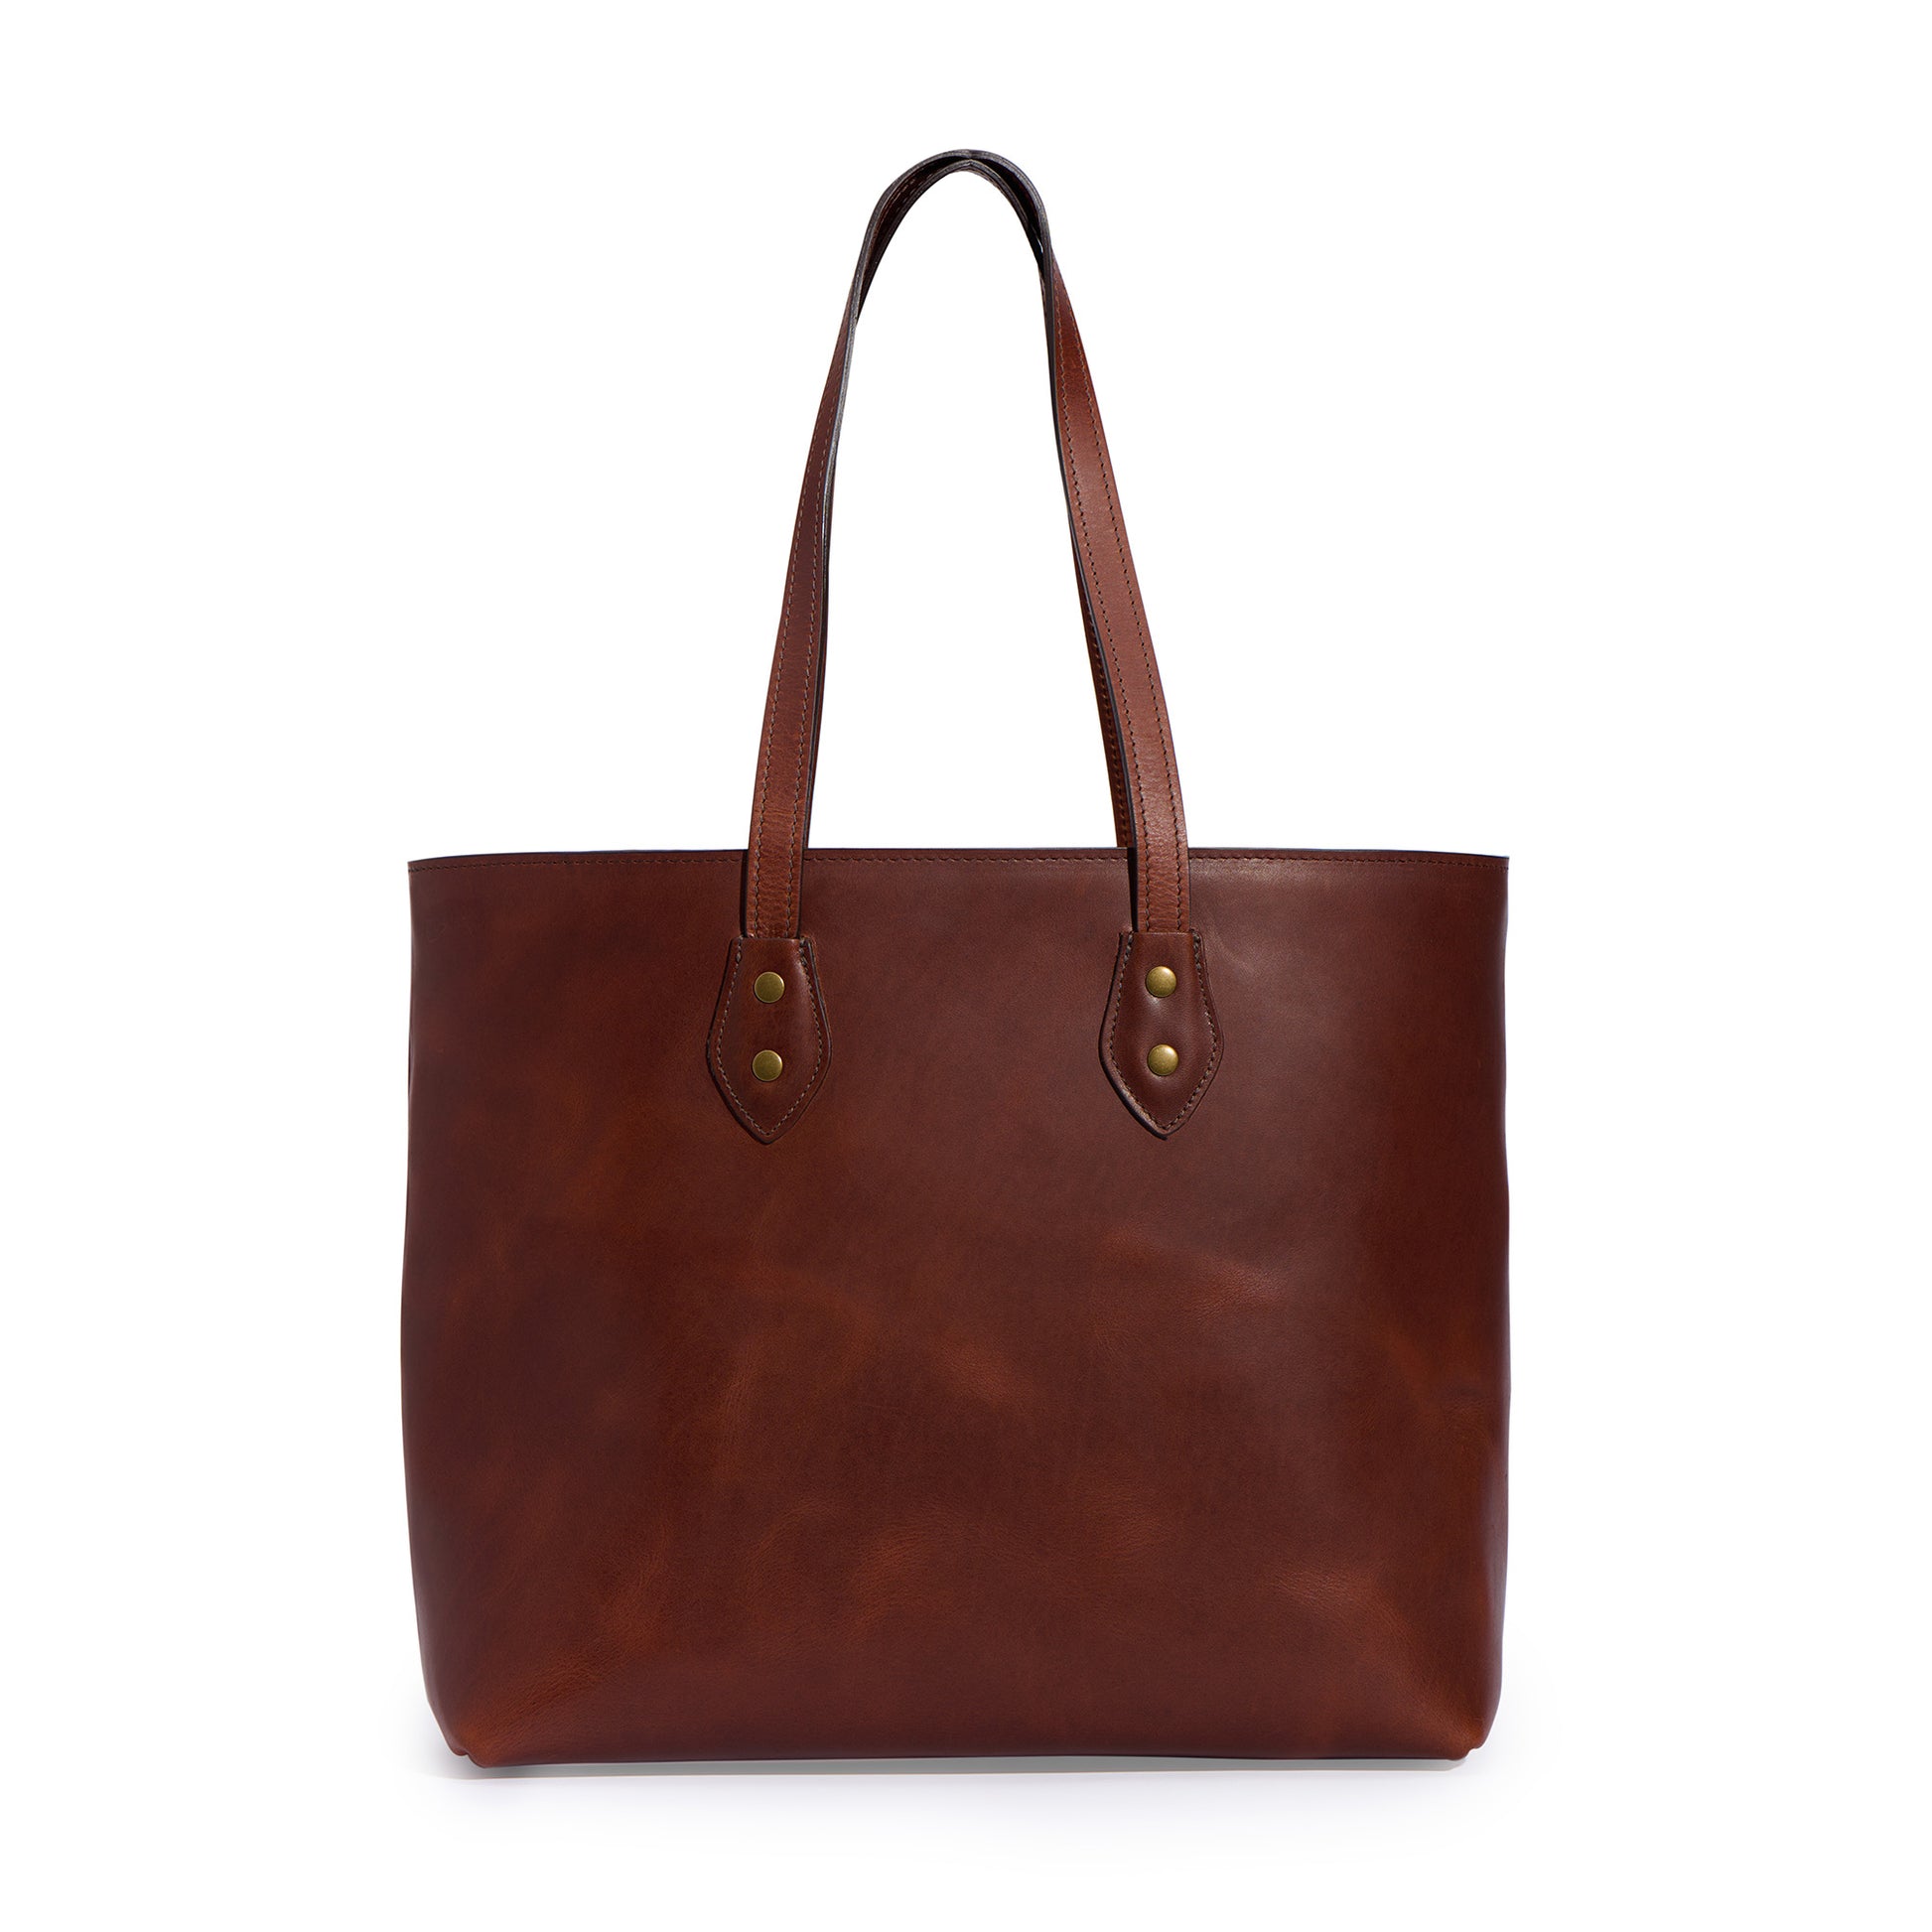 full grain leather tote bag in vintage brown color by Jackson Wayne - front